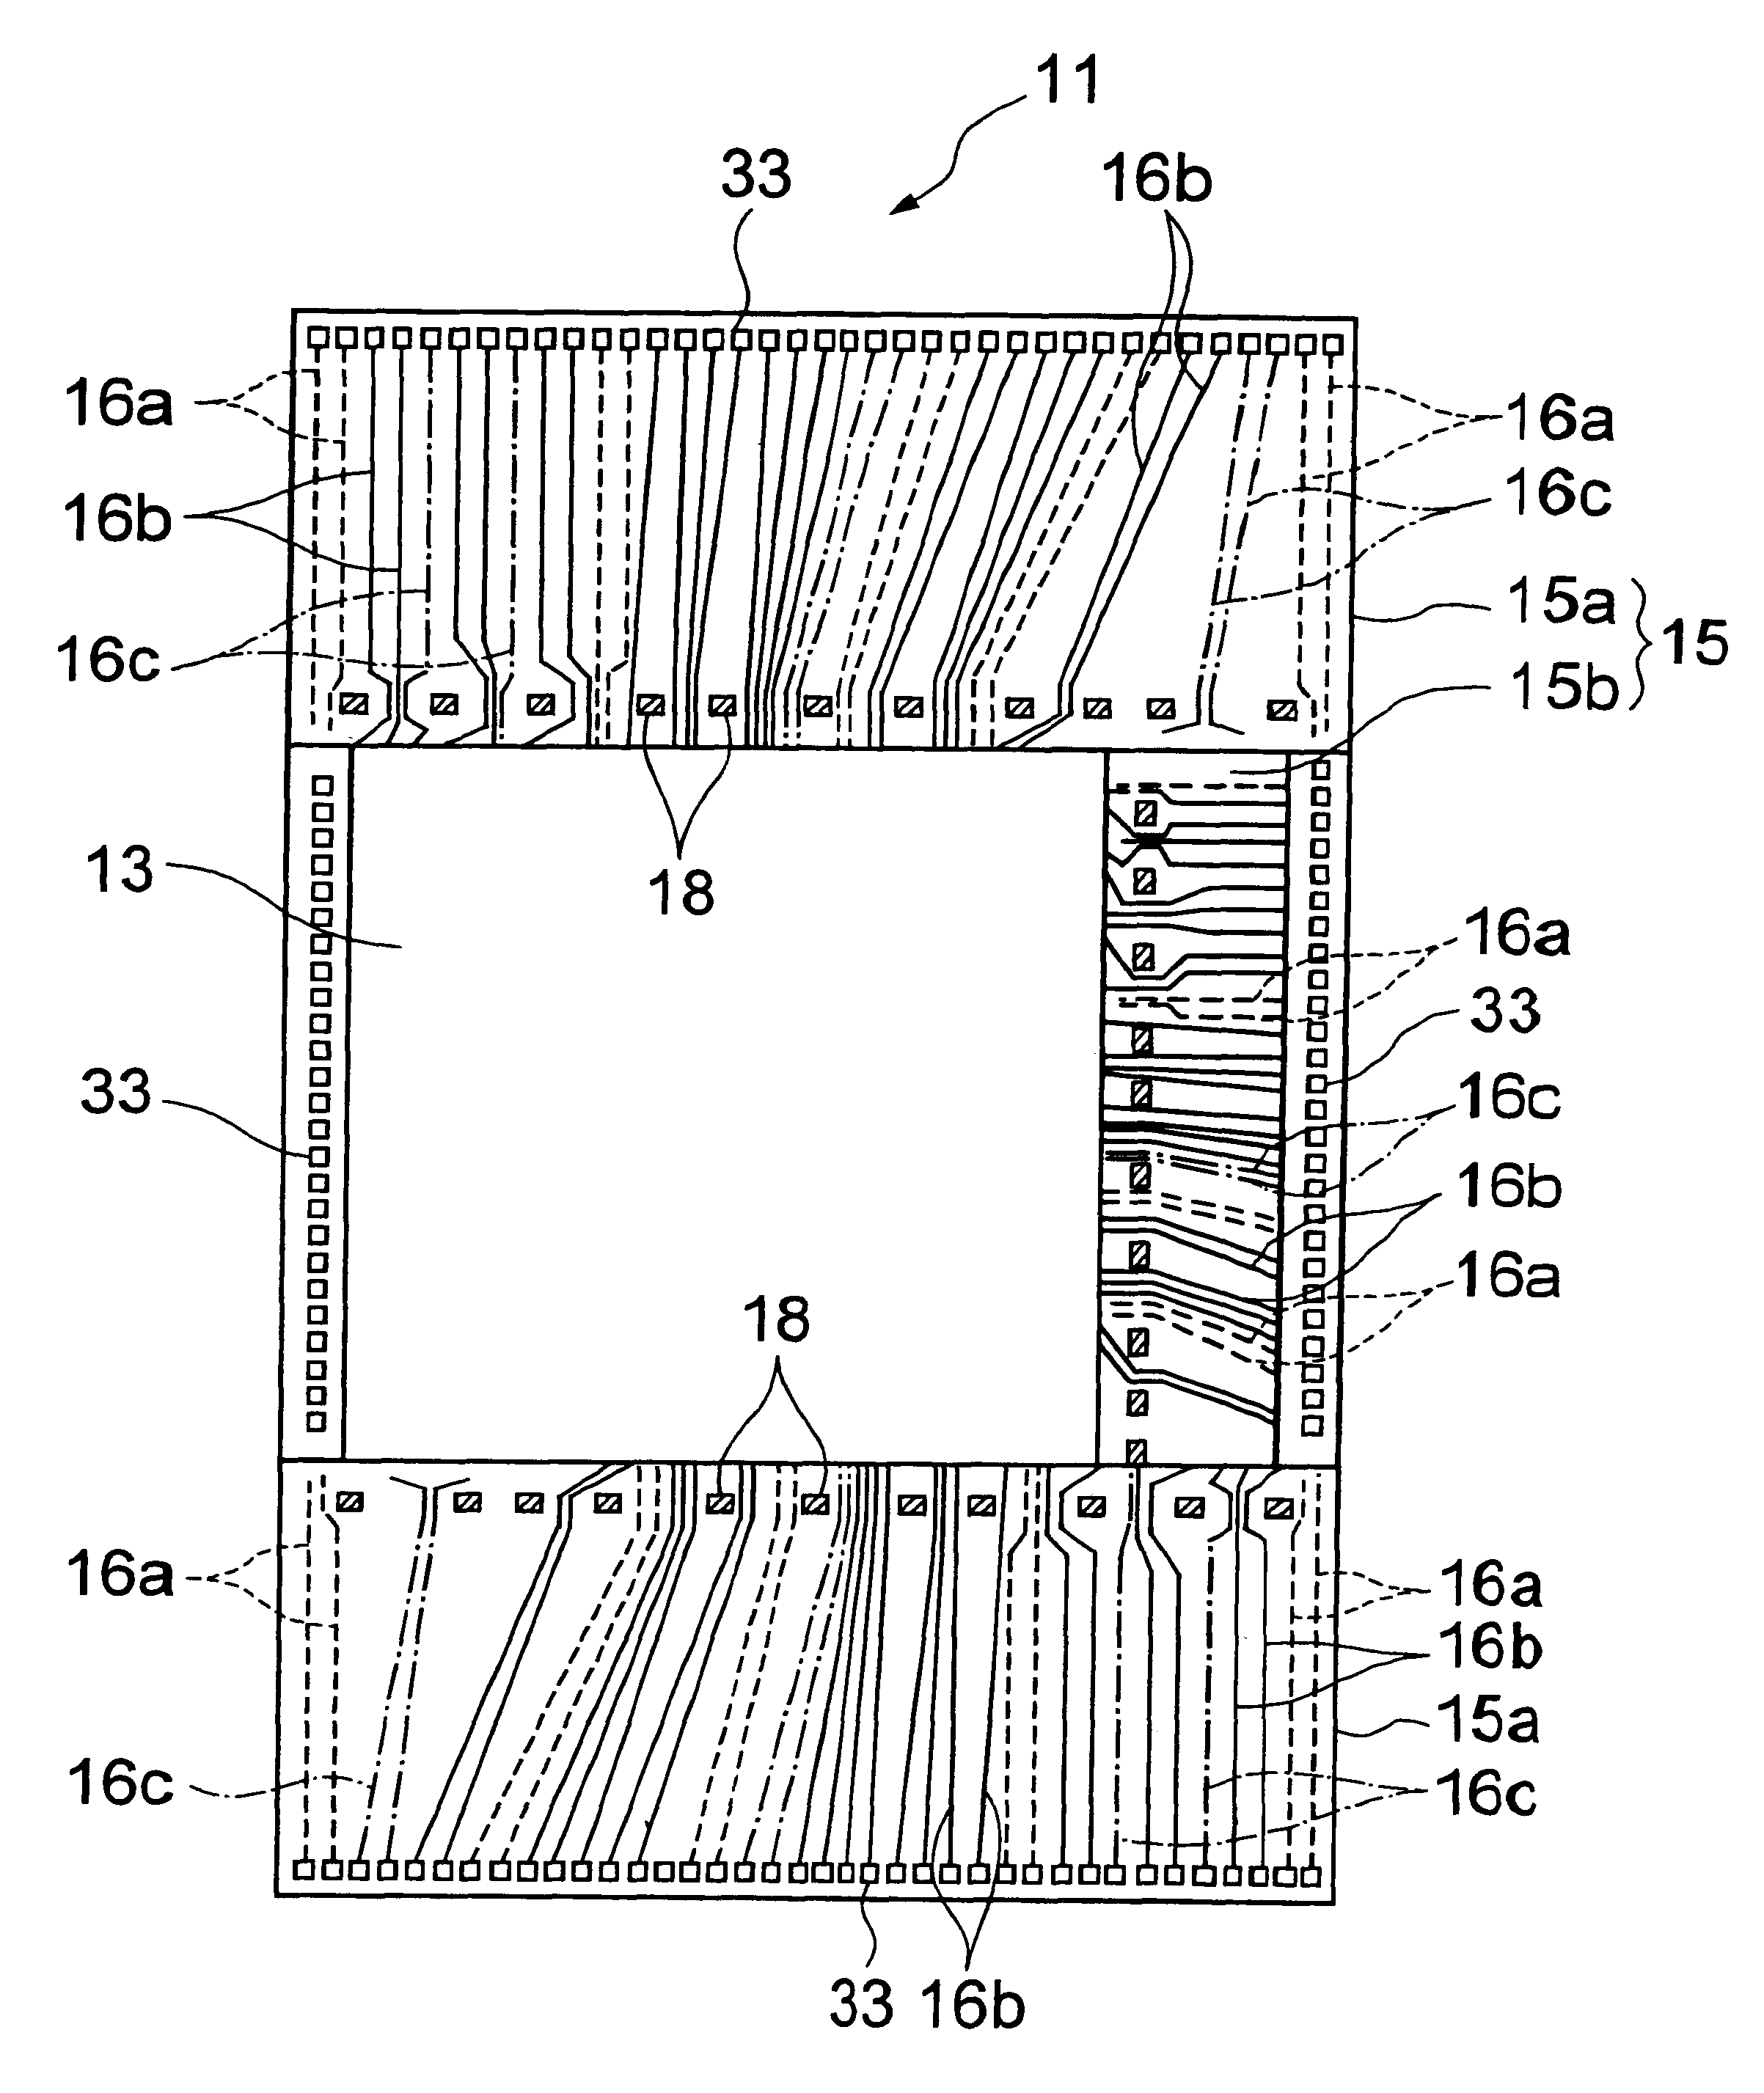 Semiconductor integrated circuit having a MPU and a DRAM cache memory